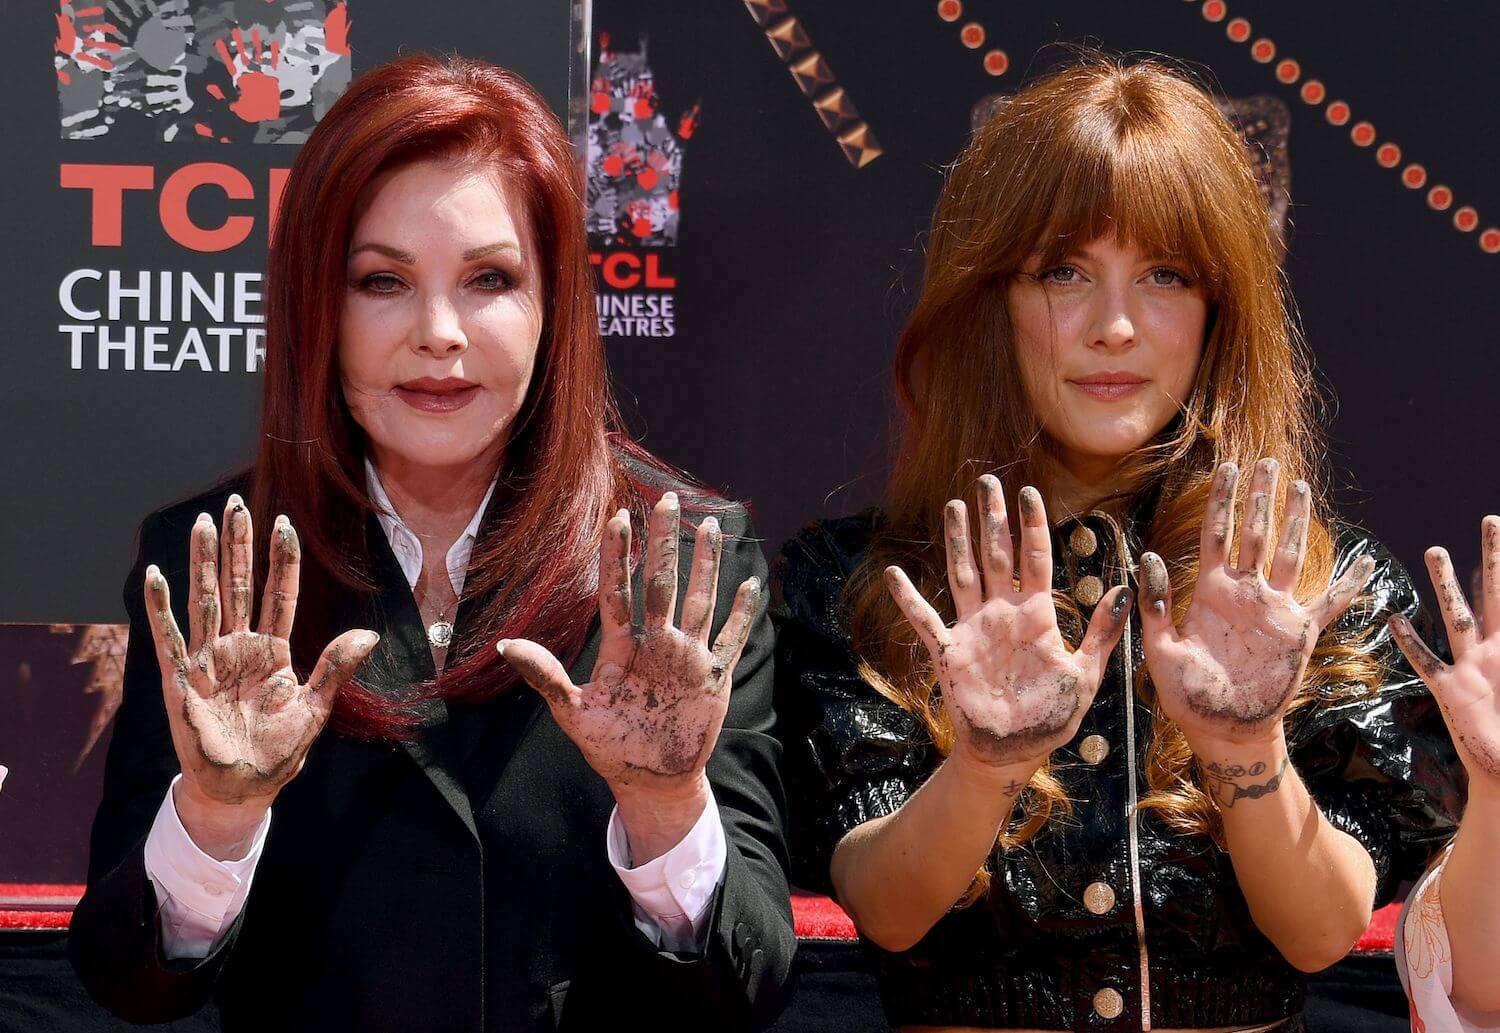 Priscilla Presley and Riley Keough holding their hands up at the Handprint Ceremony